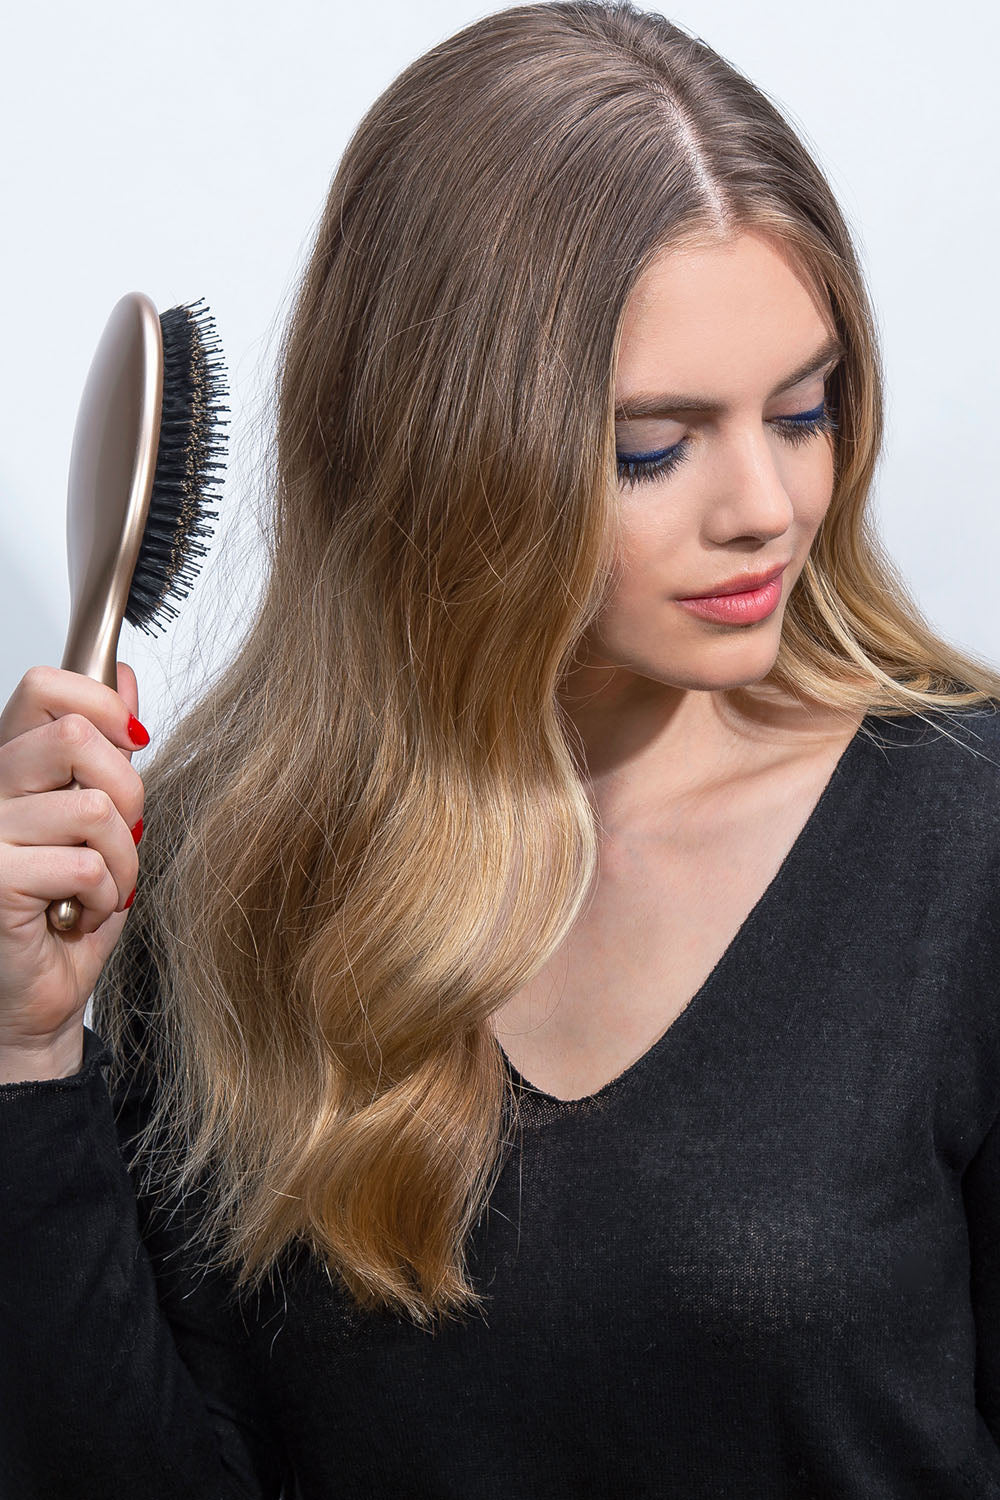 The Hair Edit Finish + Shine Boar Bristle Hair Brush in Gold Color used by medium length haired blonde female model